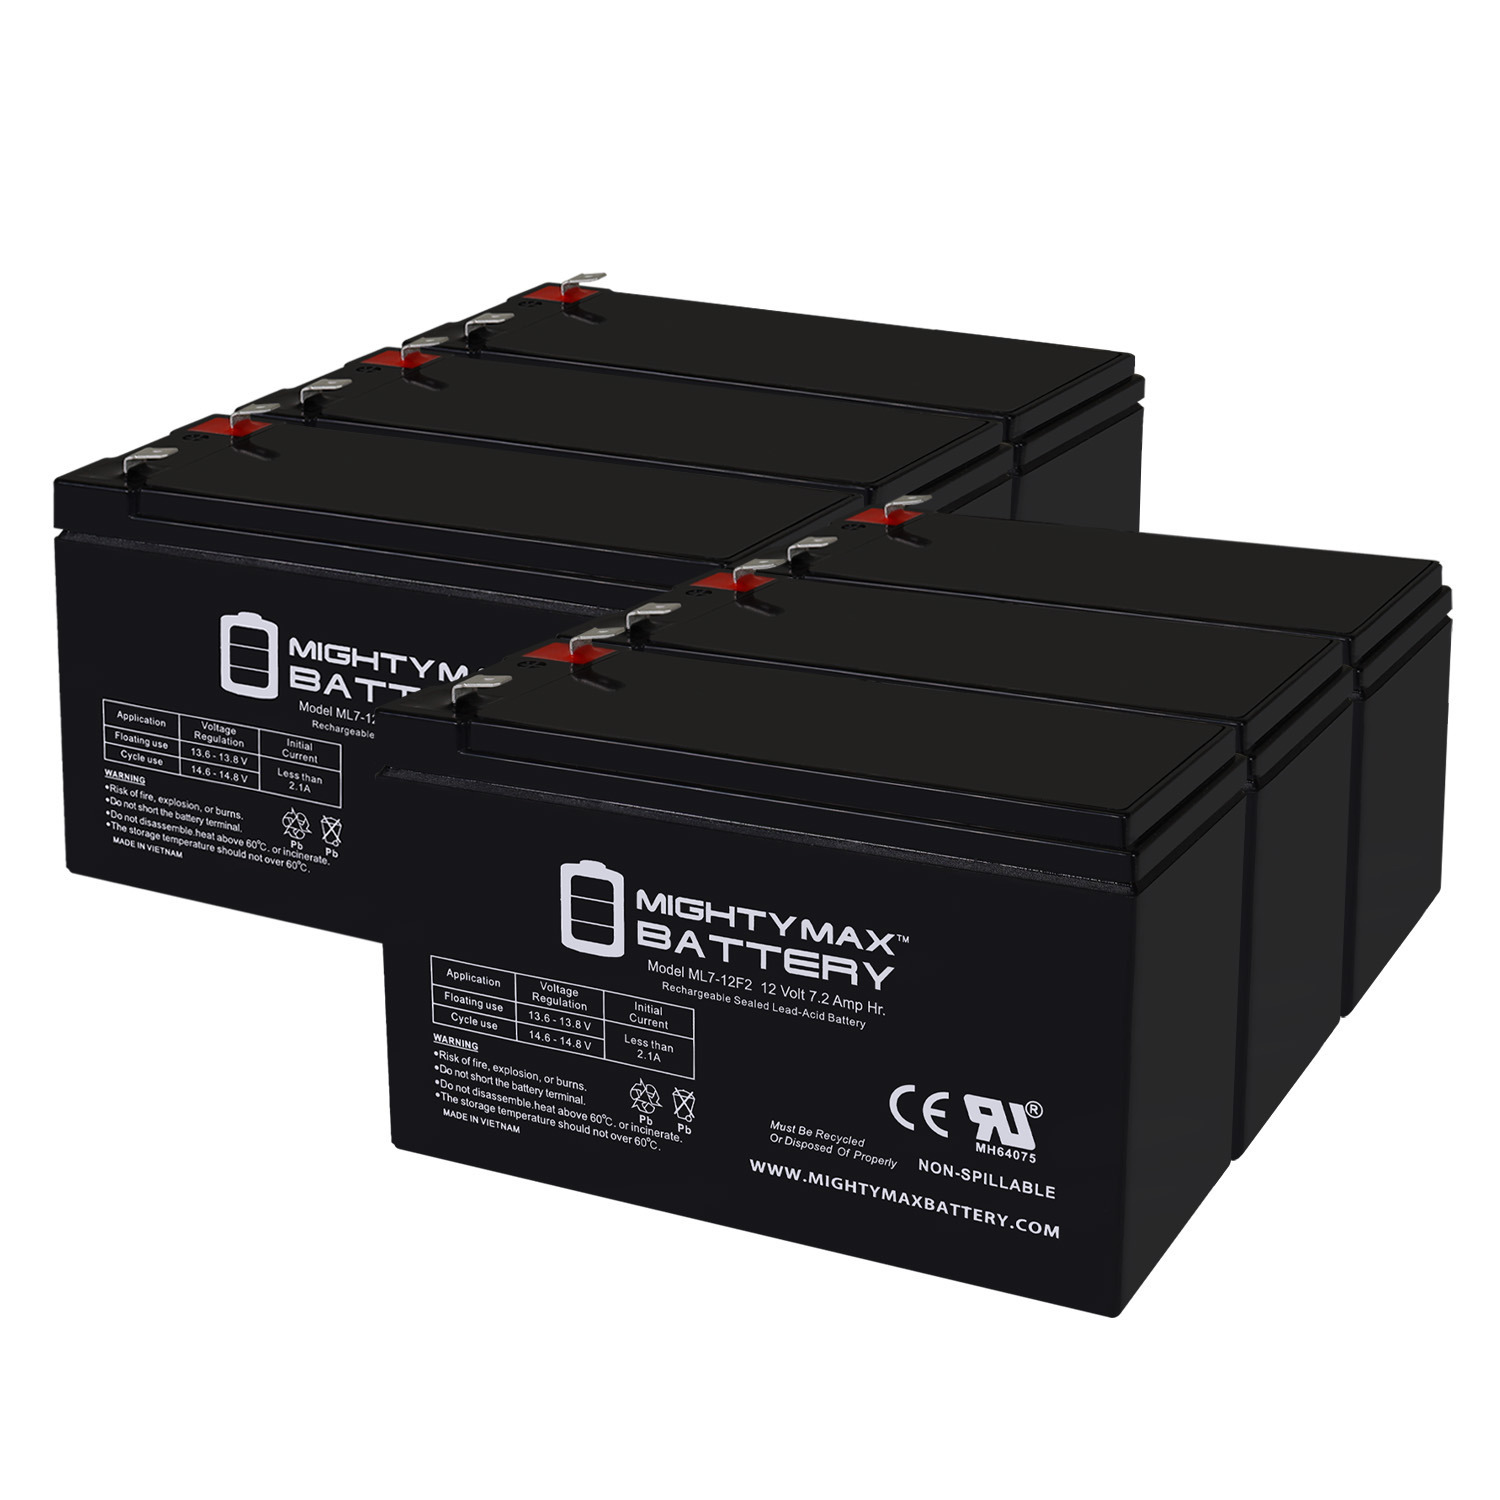 12V 7Ah F2 Replacement Battery for Merida PC500 Scooter - 6 Pack